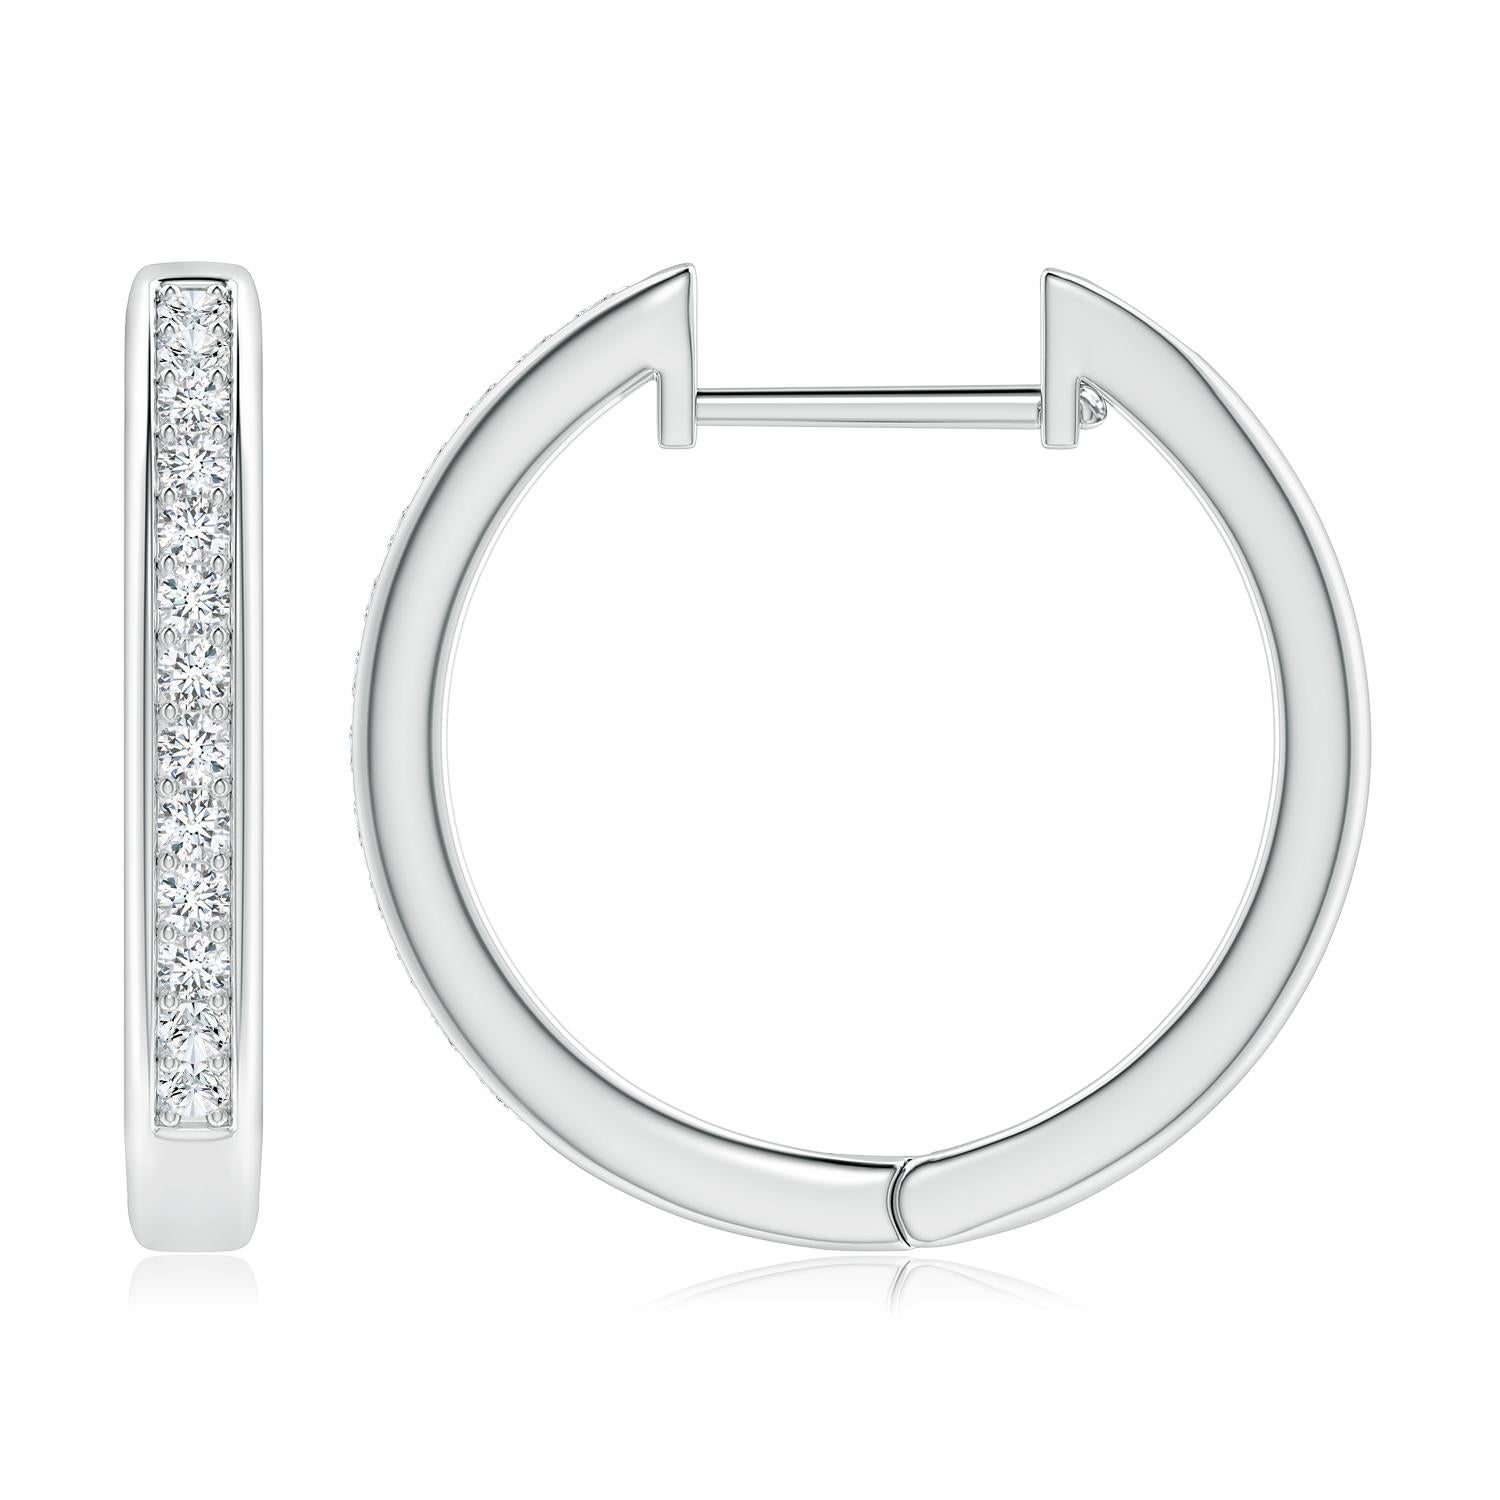 Round Cut Natural Diamond Hoop Earrings in 14K White Gold (0.5cttw Color-G Clarity-VS2) For Sale